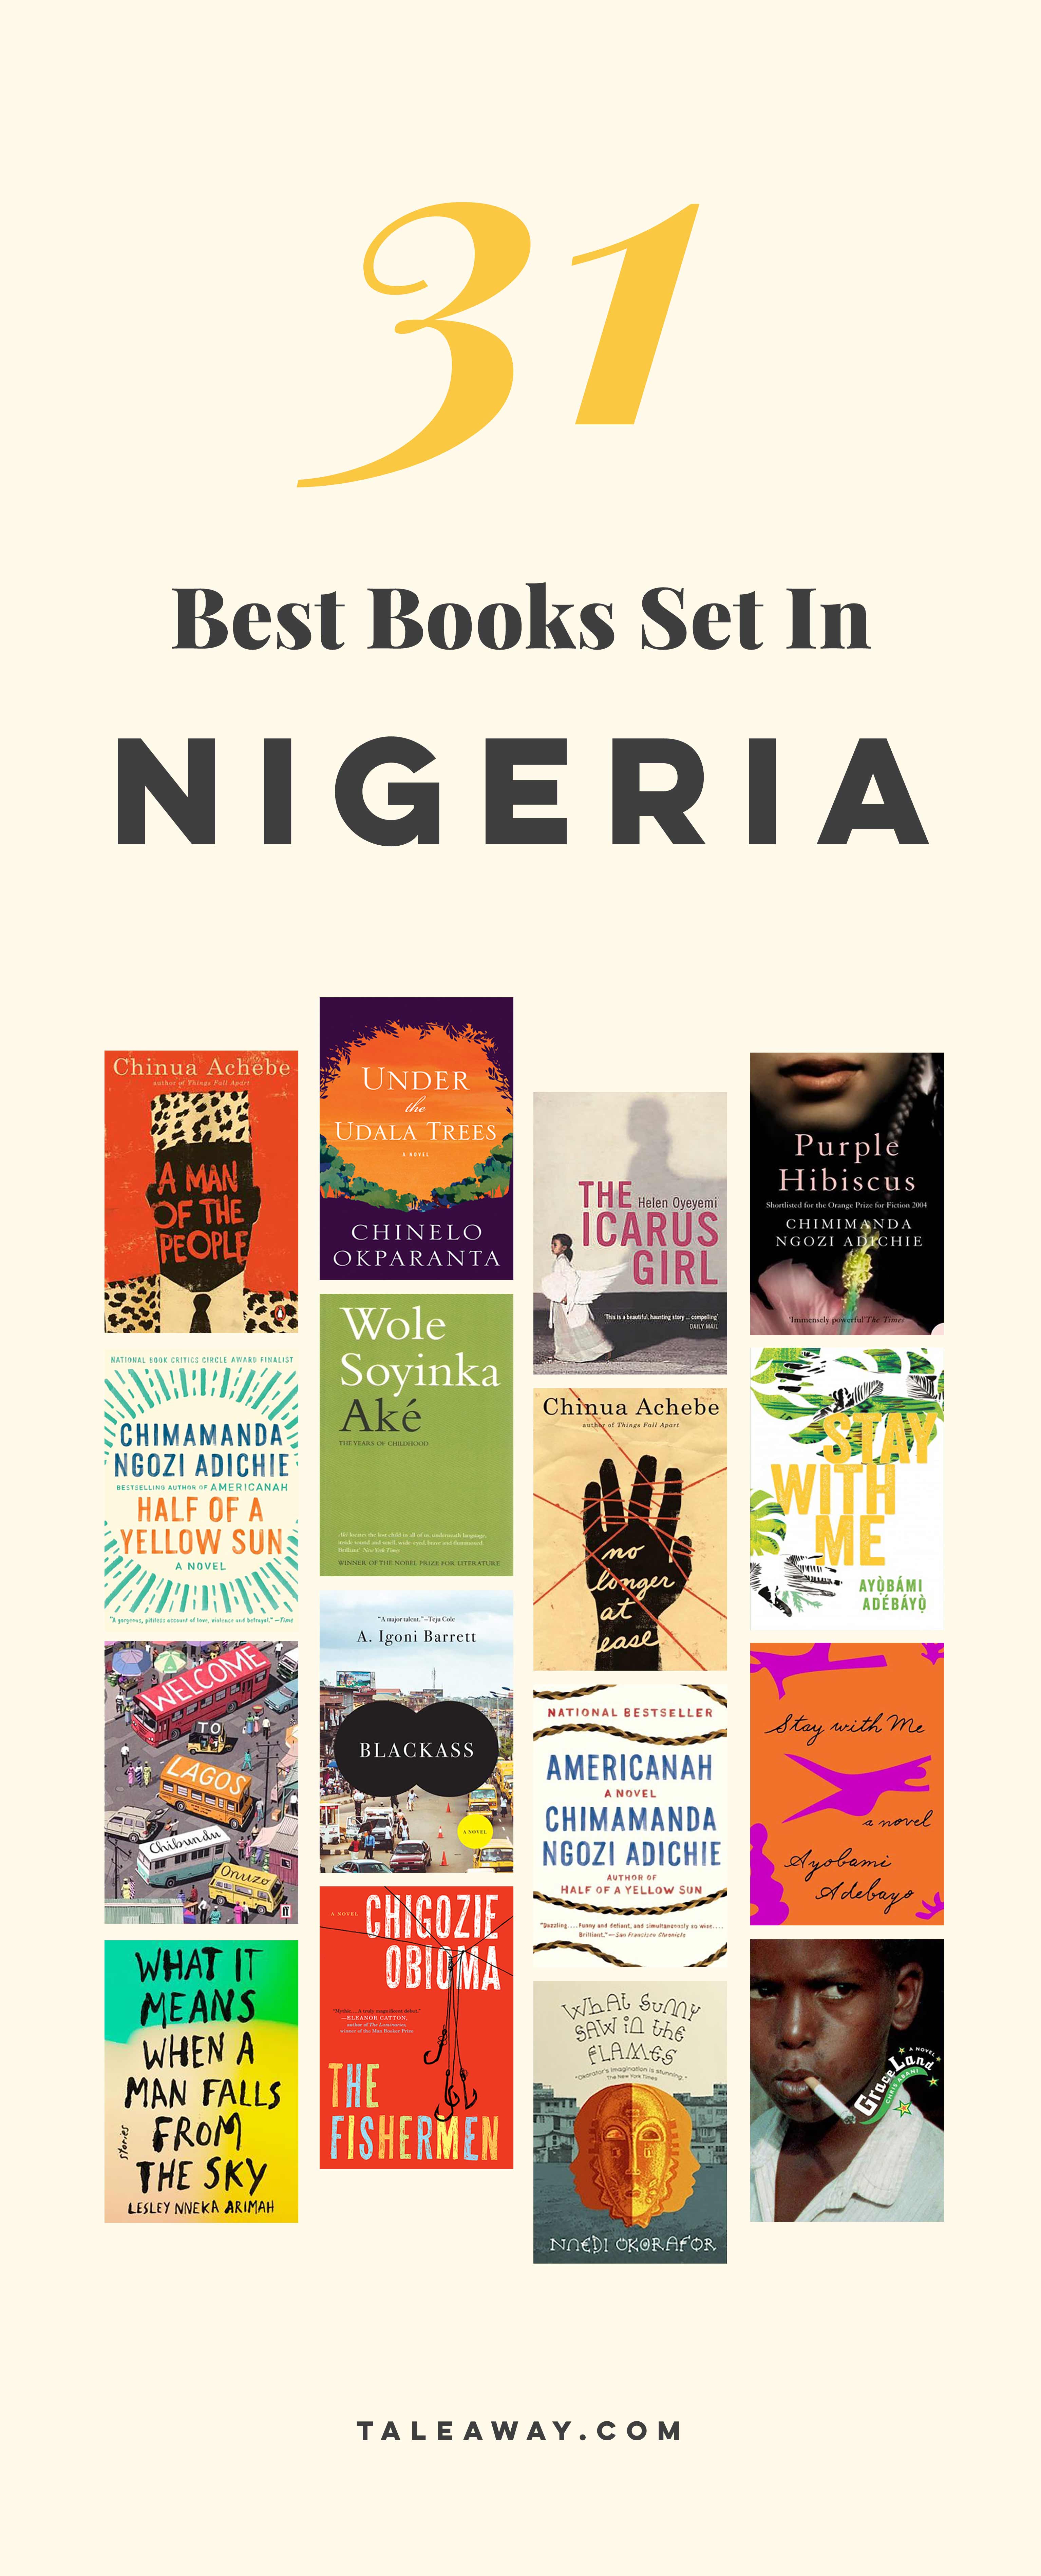 Books Set In Nigeria - For more books visit www.taleway.com to find books set around the world. nigerian books, books about nigeria, nigerian authors, nigeria travel, novels set in nigeria, nigerian novels, books and travel, travel reads, reading list, books around the world, books to read, nigeria, books set in different countries